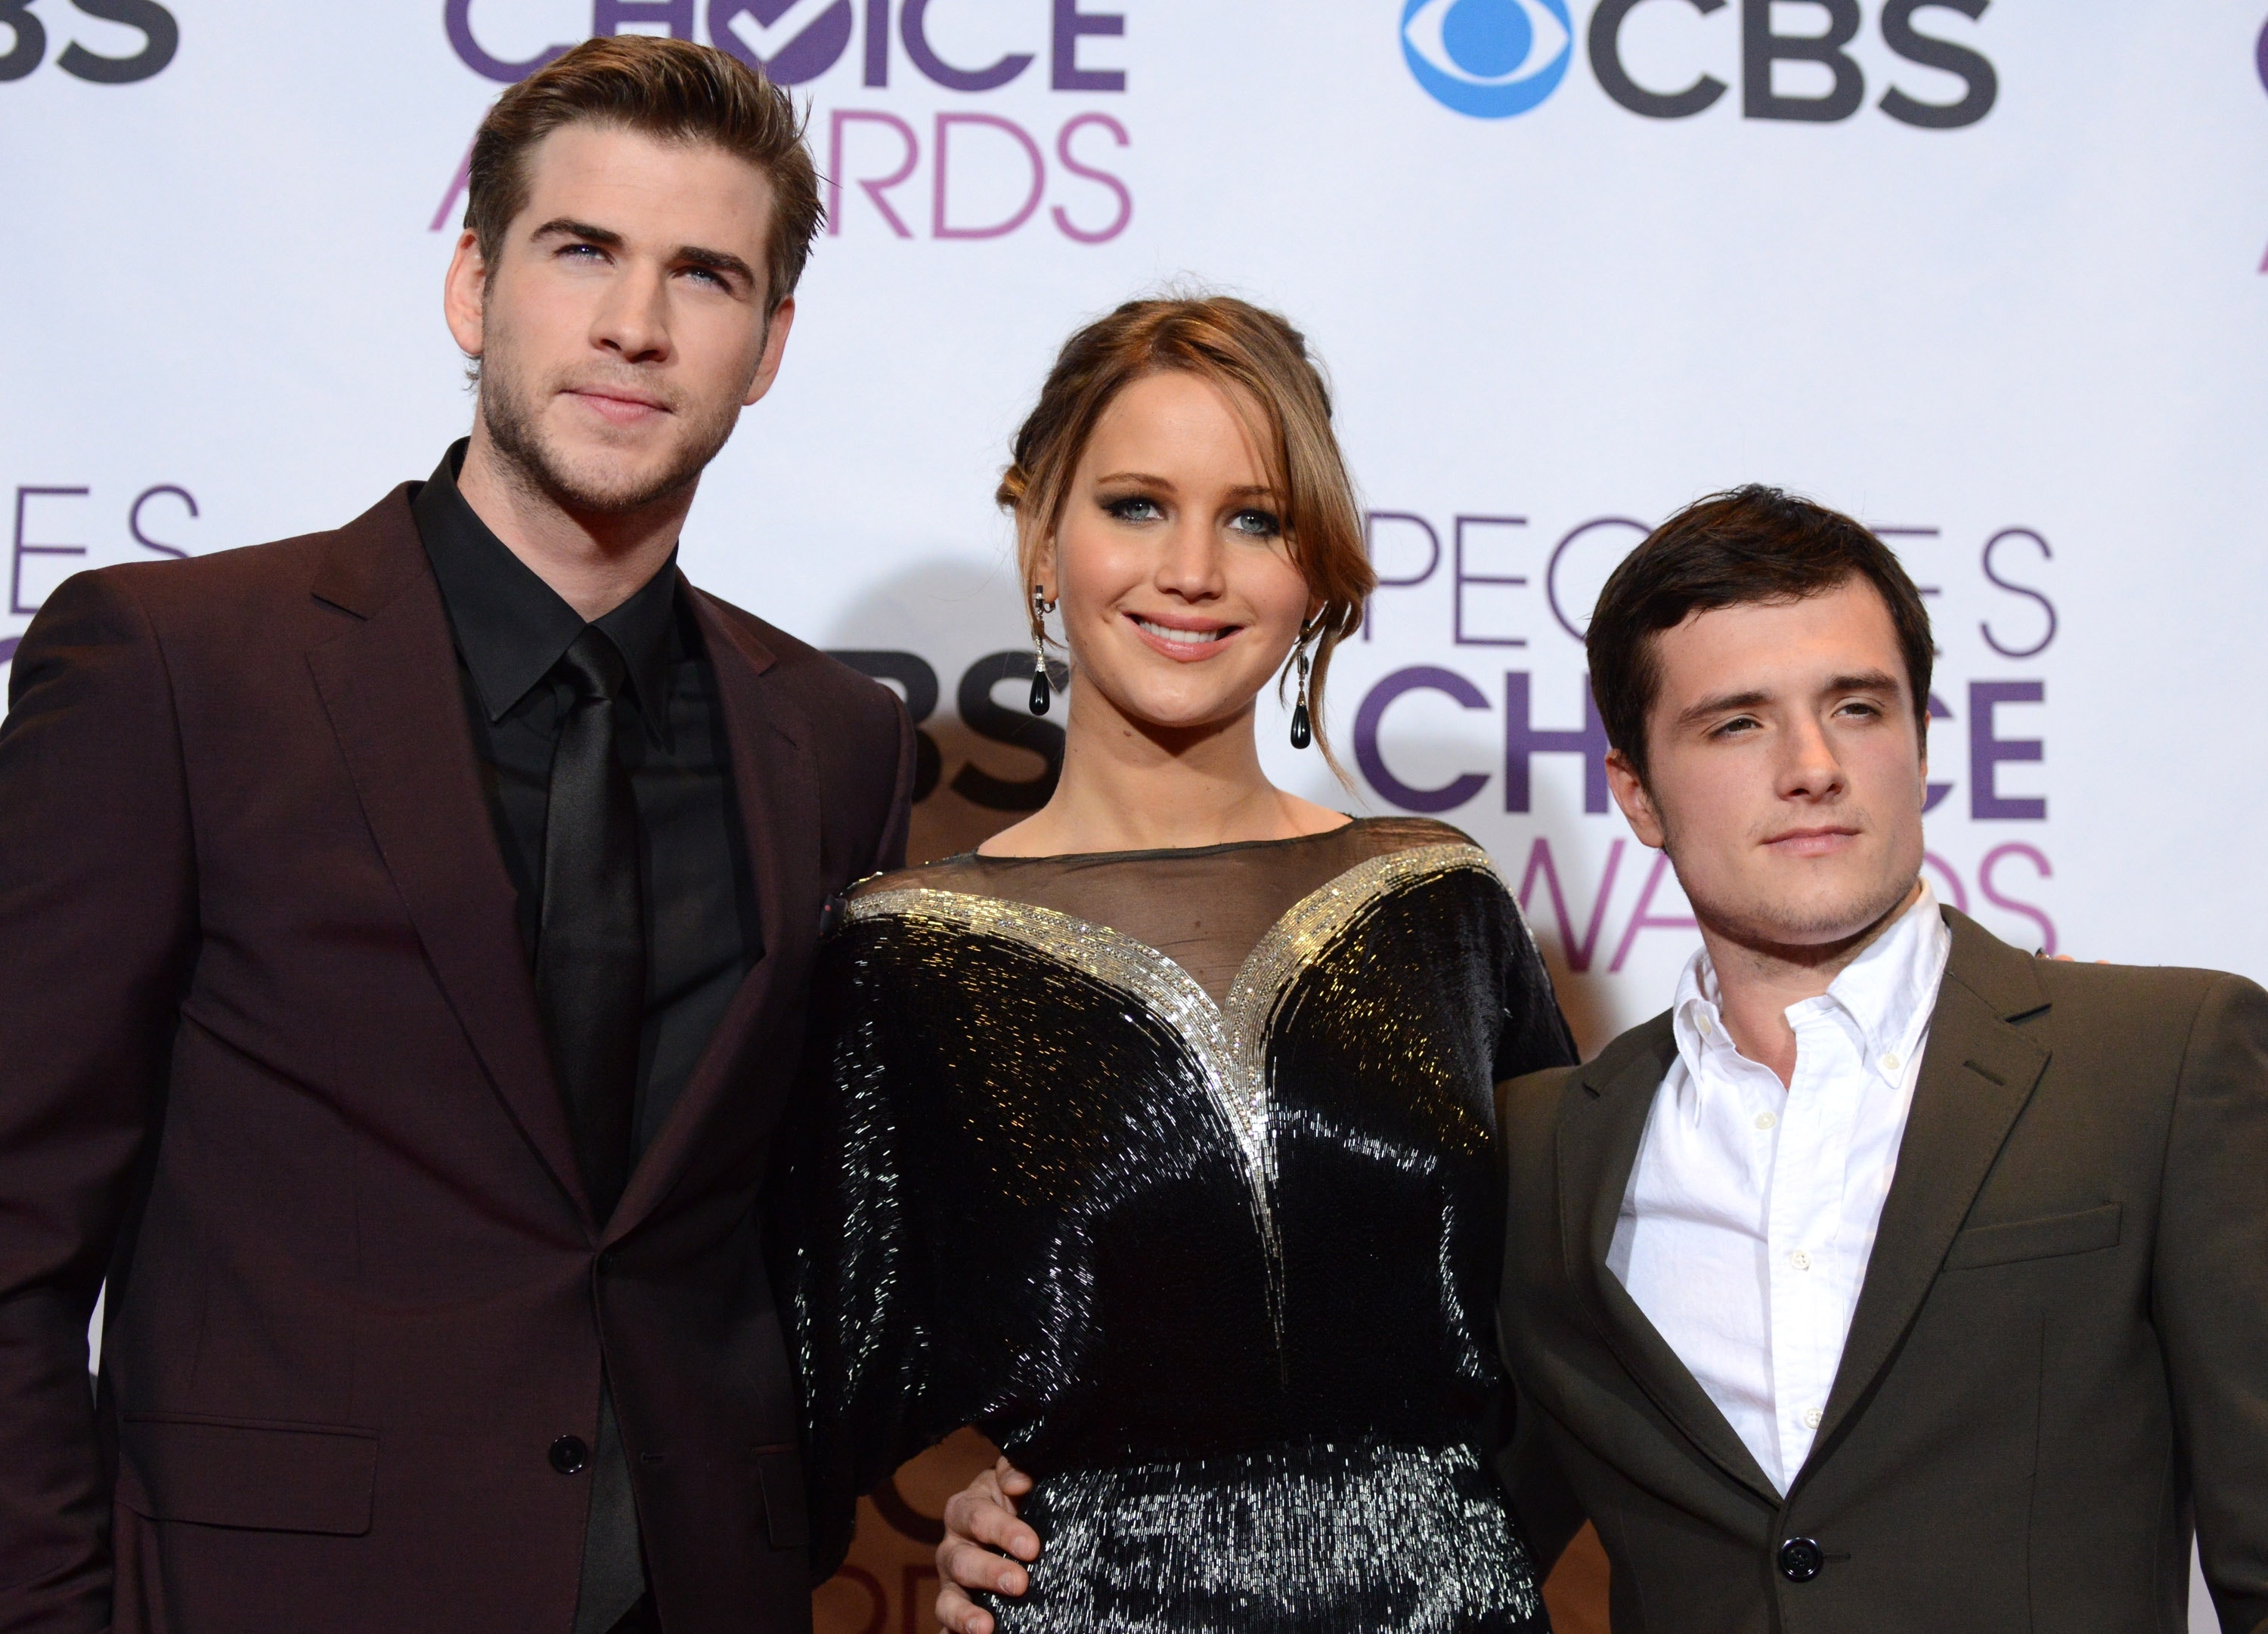 People's Choice Awards a feast for 'Hunger Games' – Delco Times